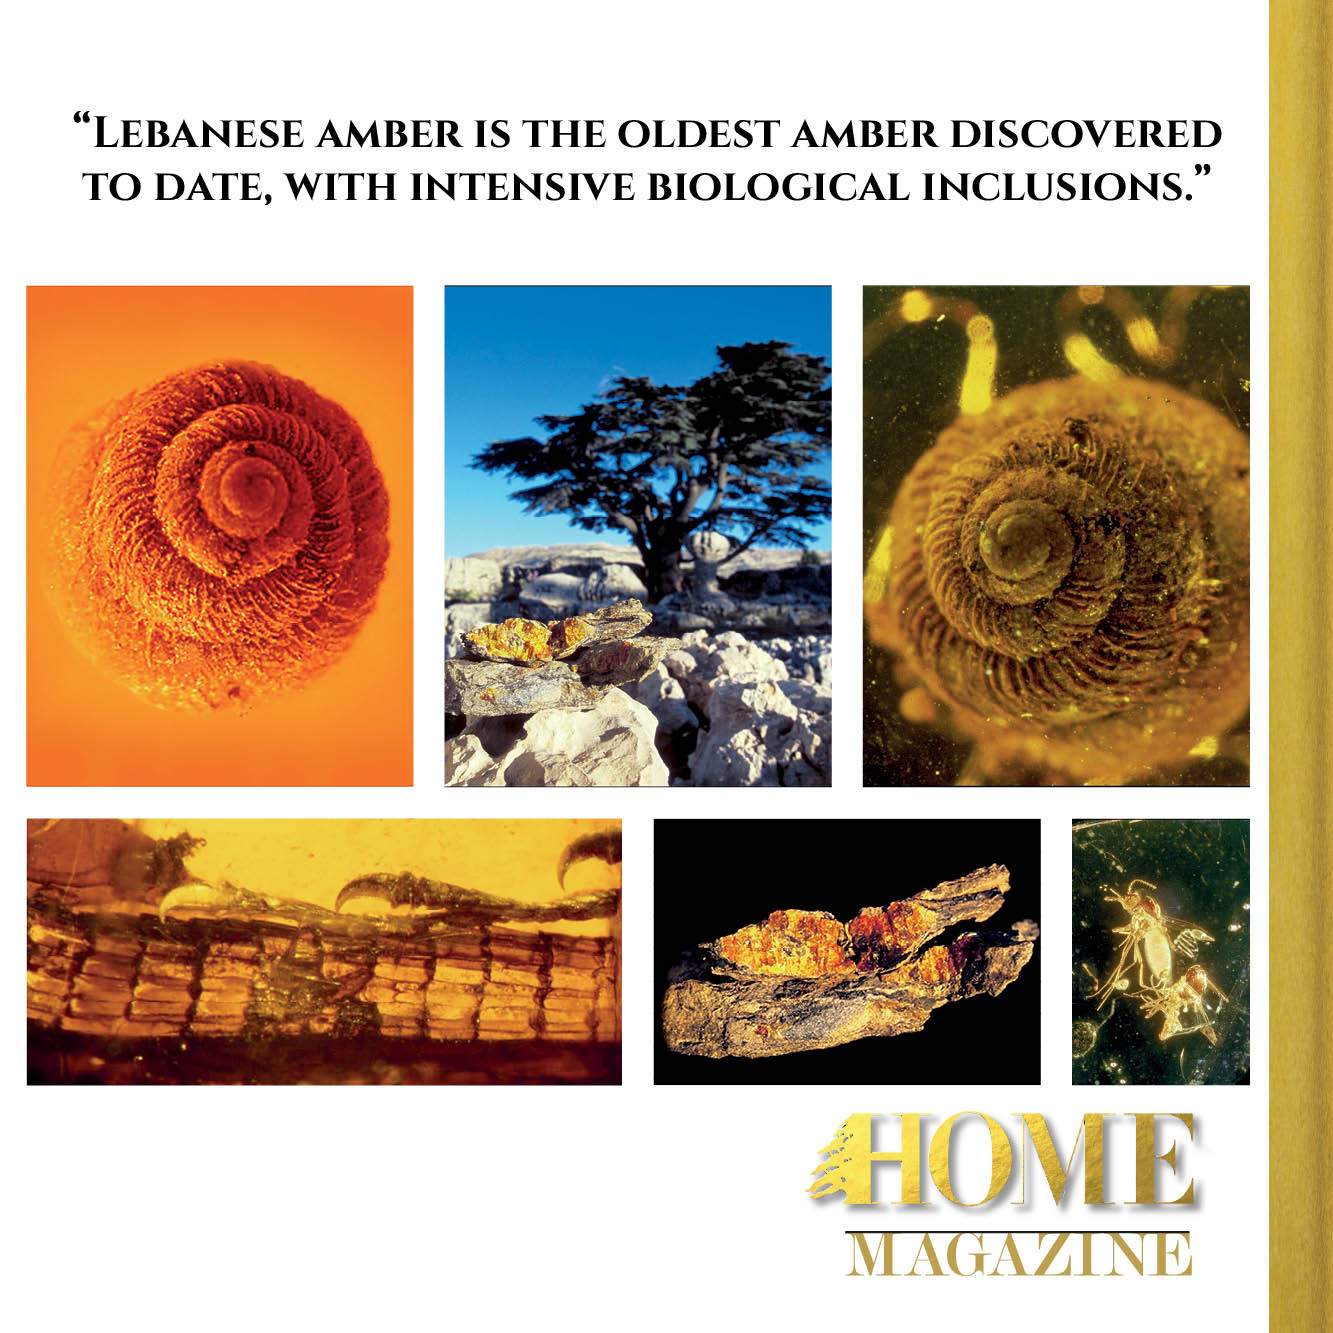 "Lebanese amber is the oldest amber discovered to date, with intensive biological inclusions."